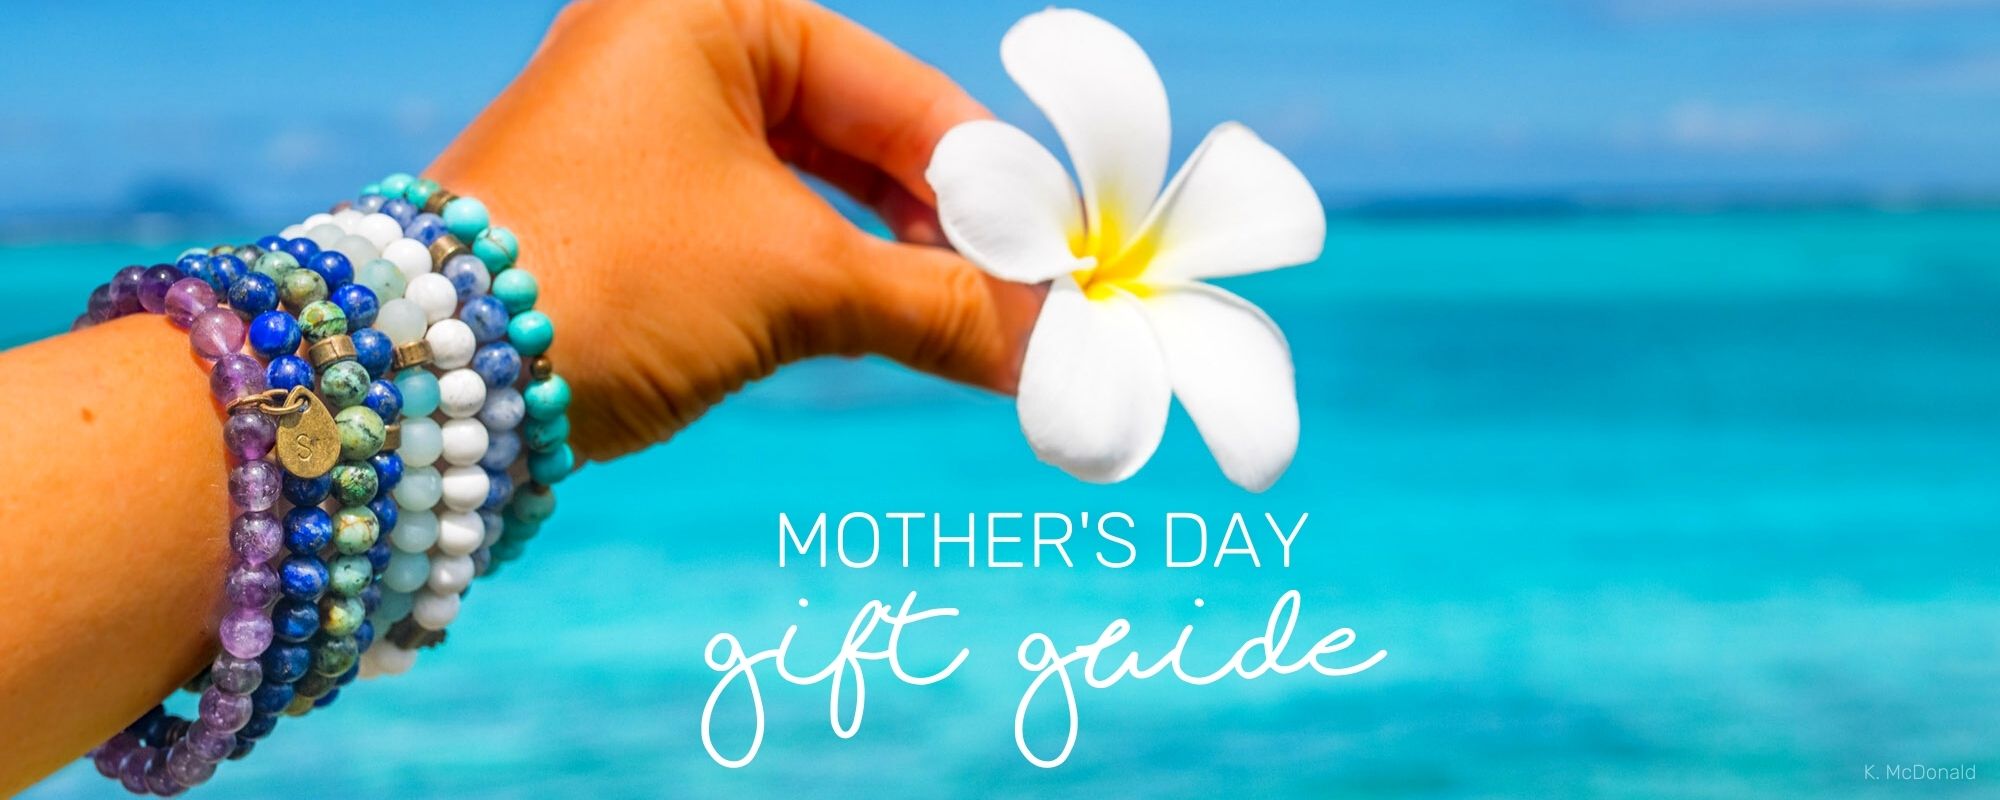 MOTHER'S DAY GIFT GUIDE 🌺